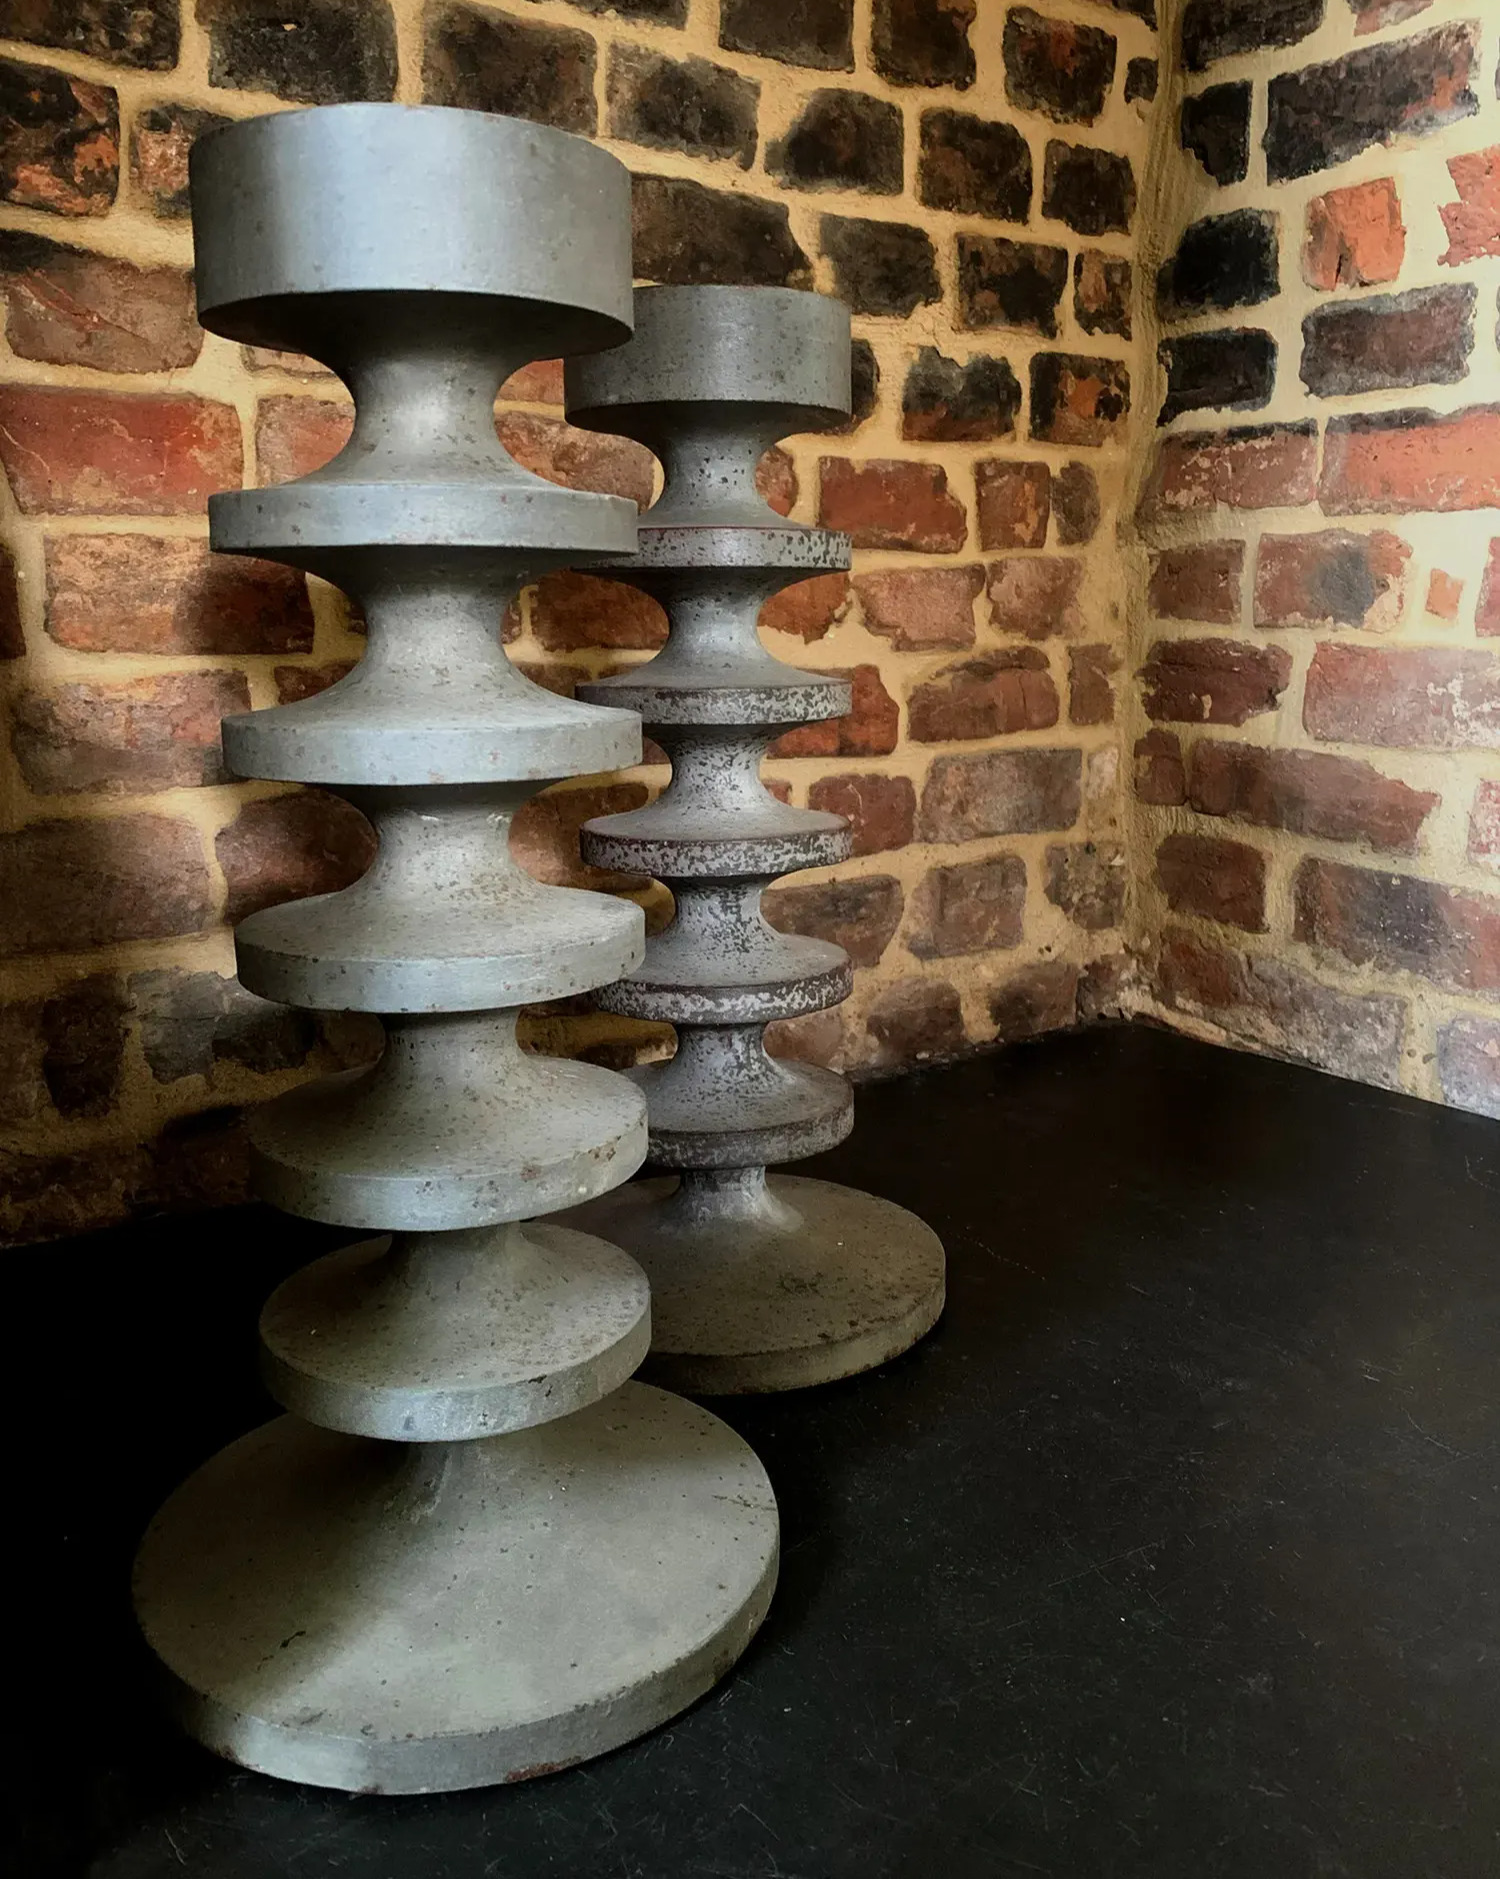 The CD40 cast iron candlesticks, each weigh ½ cwt. (hundredweight) which is roughly 4 stone